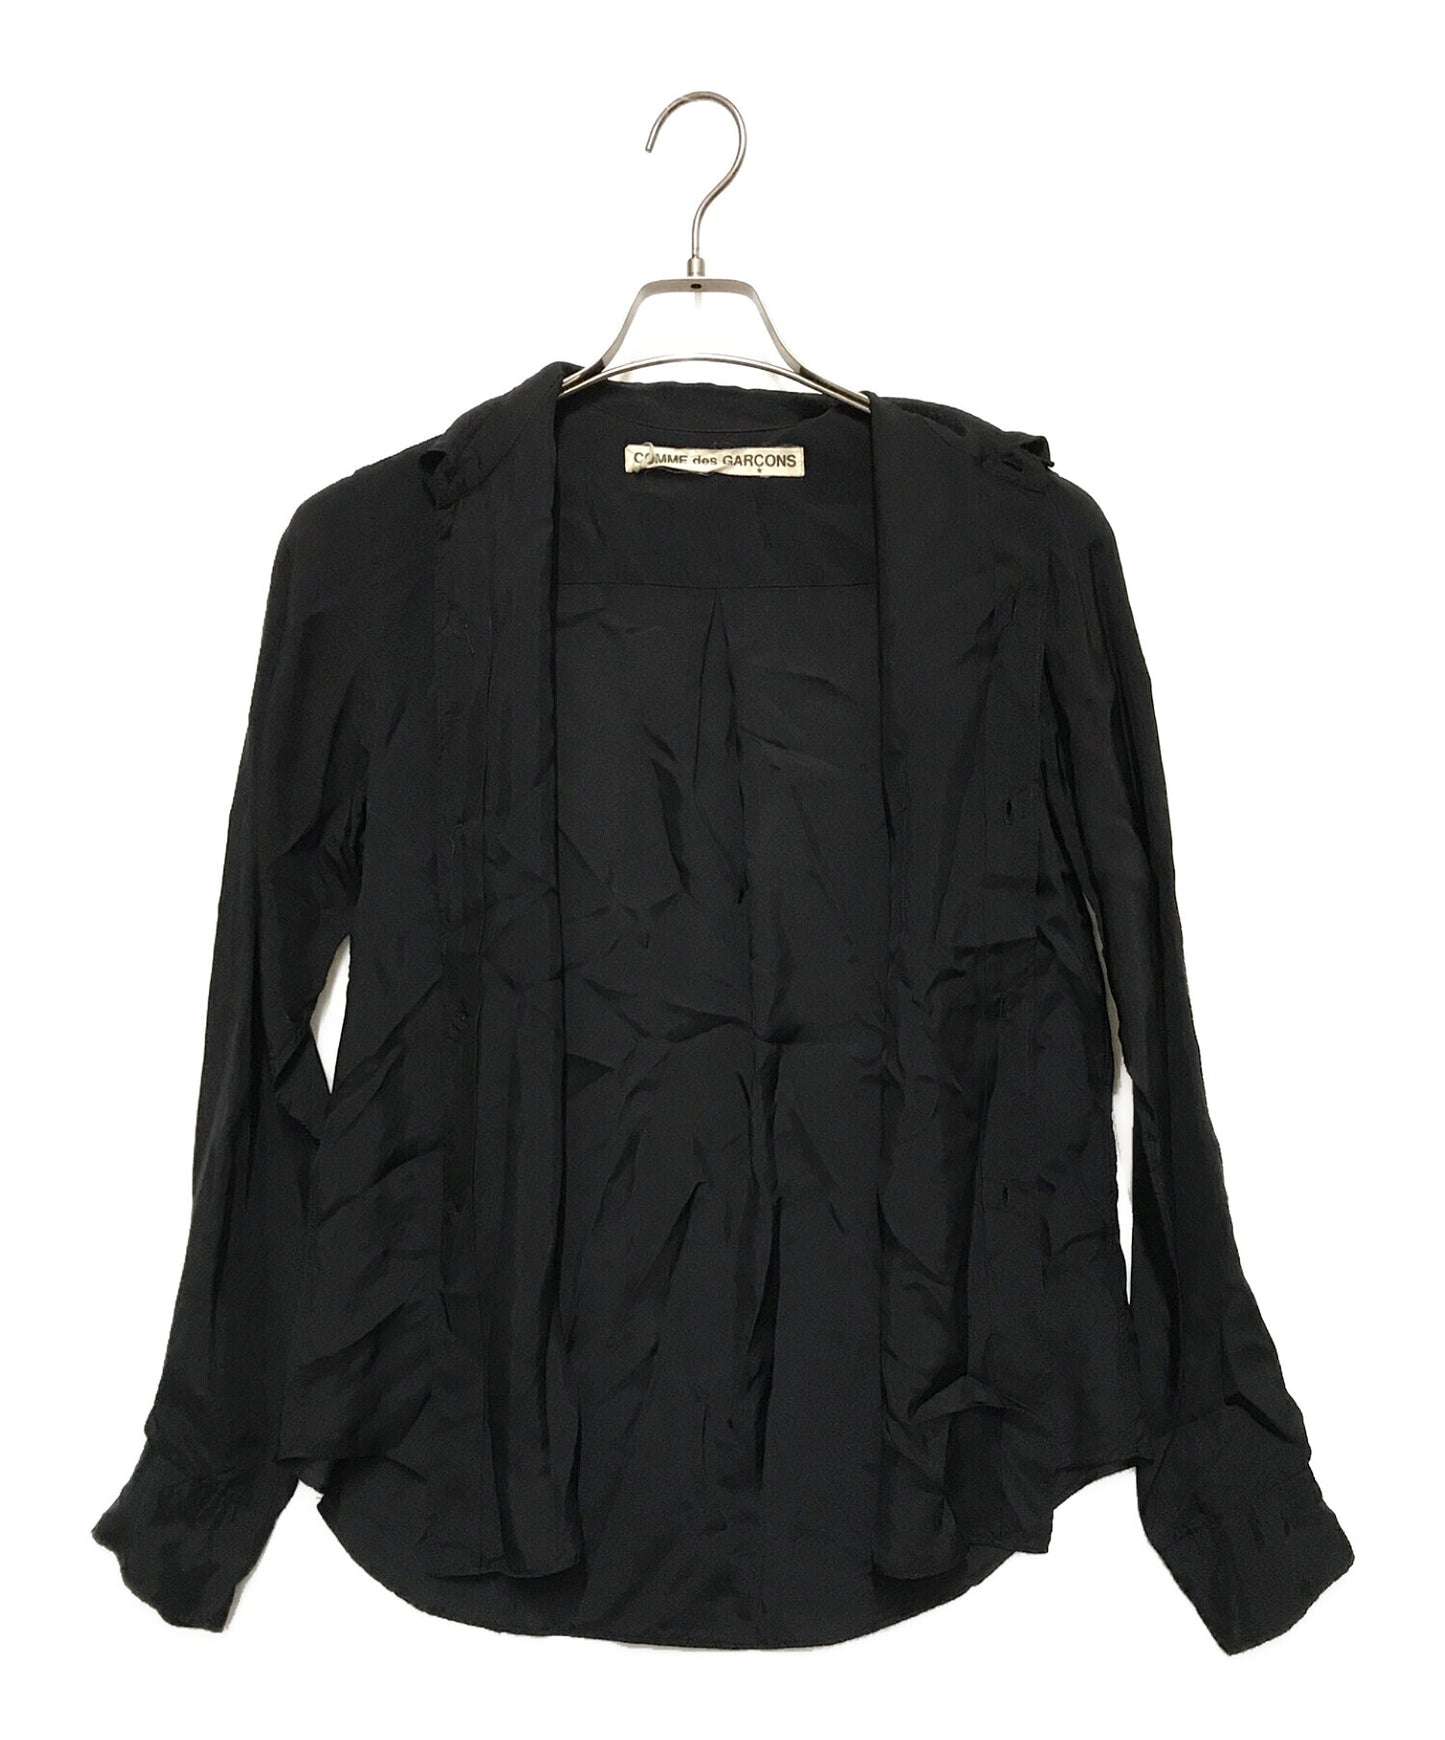 [Pre-owned] COMME des GARCONS cupra shirt gb-040310